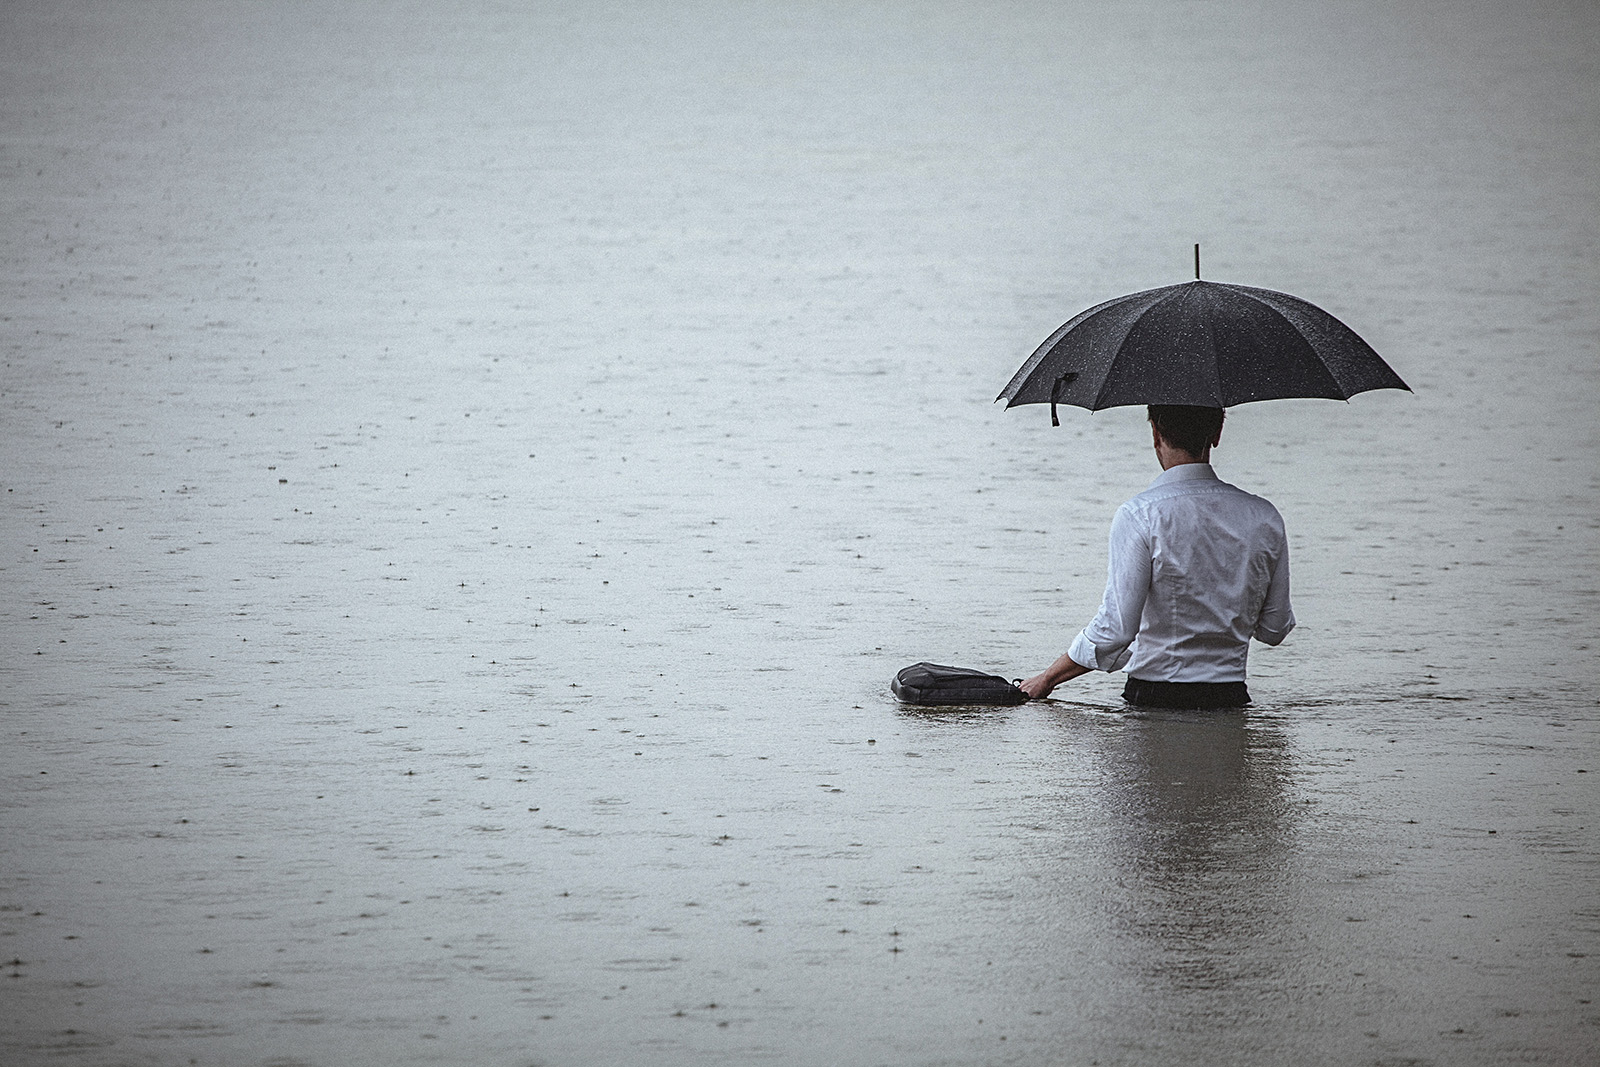 Man standing in water and holding umbrella and briefcase during rain